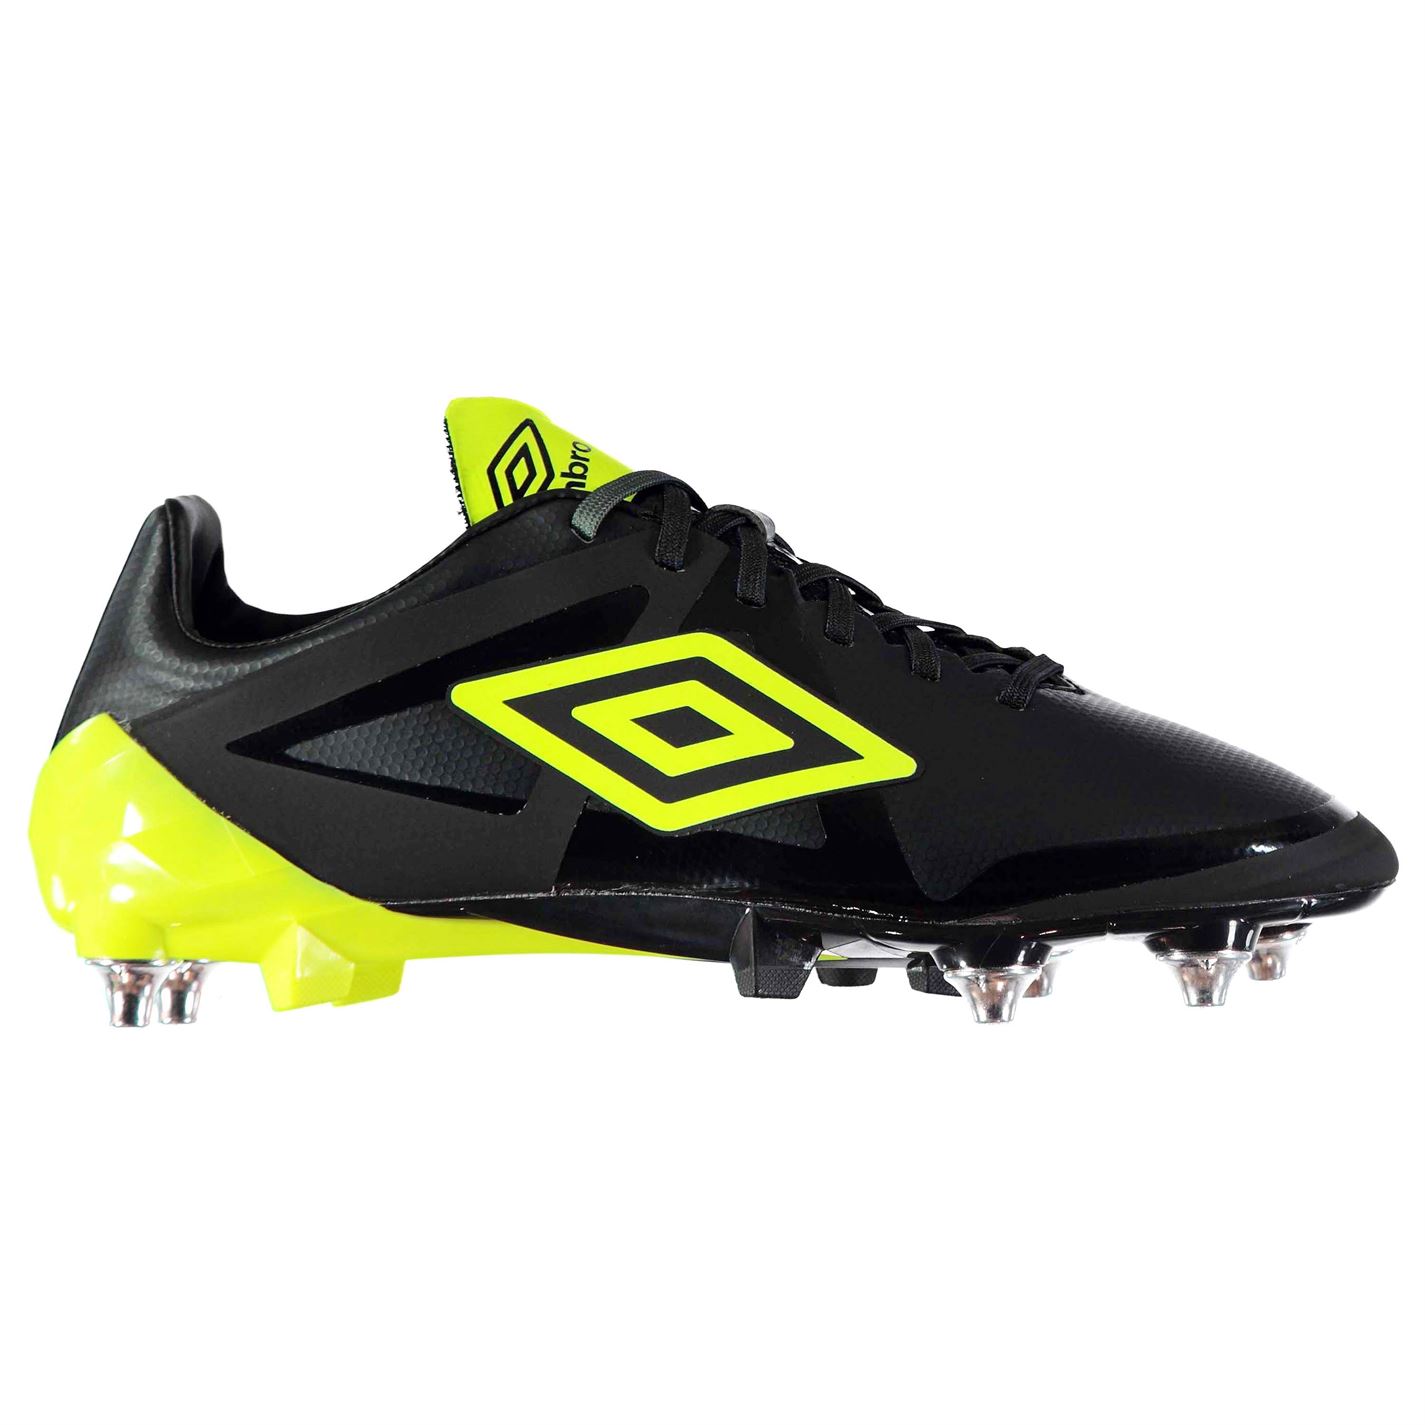 Umbro Mens Velocita Pro SG Football Boots Shoes Lace Up Synthetic ...